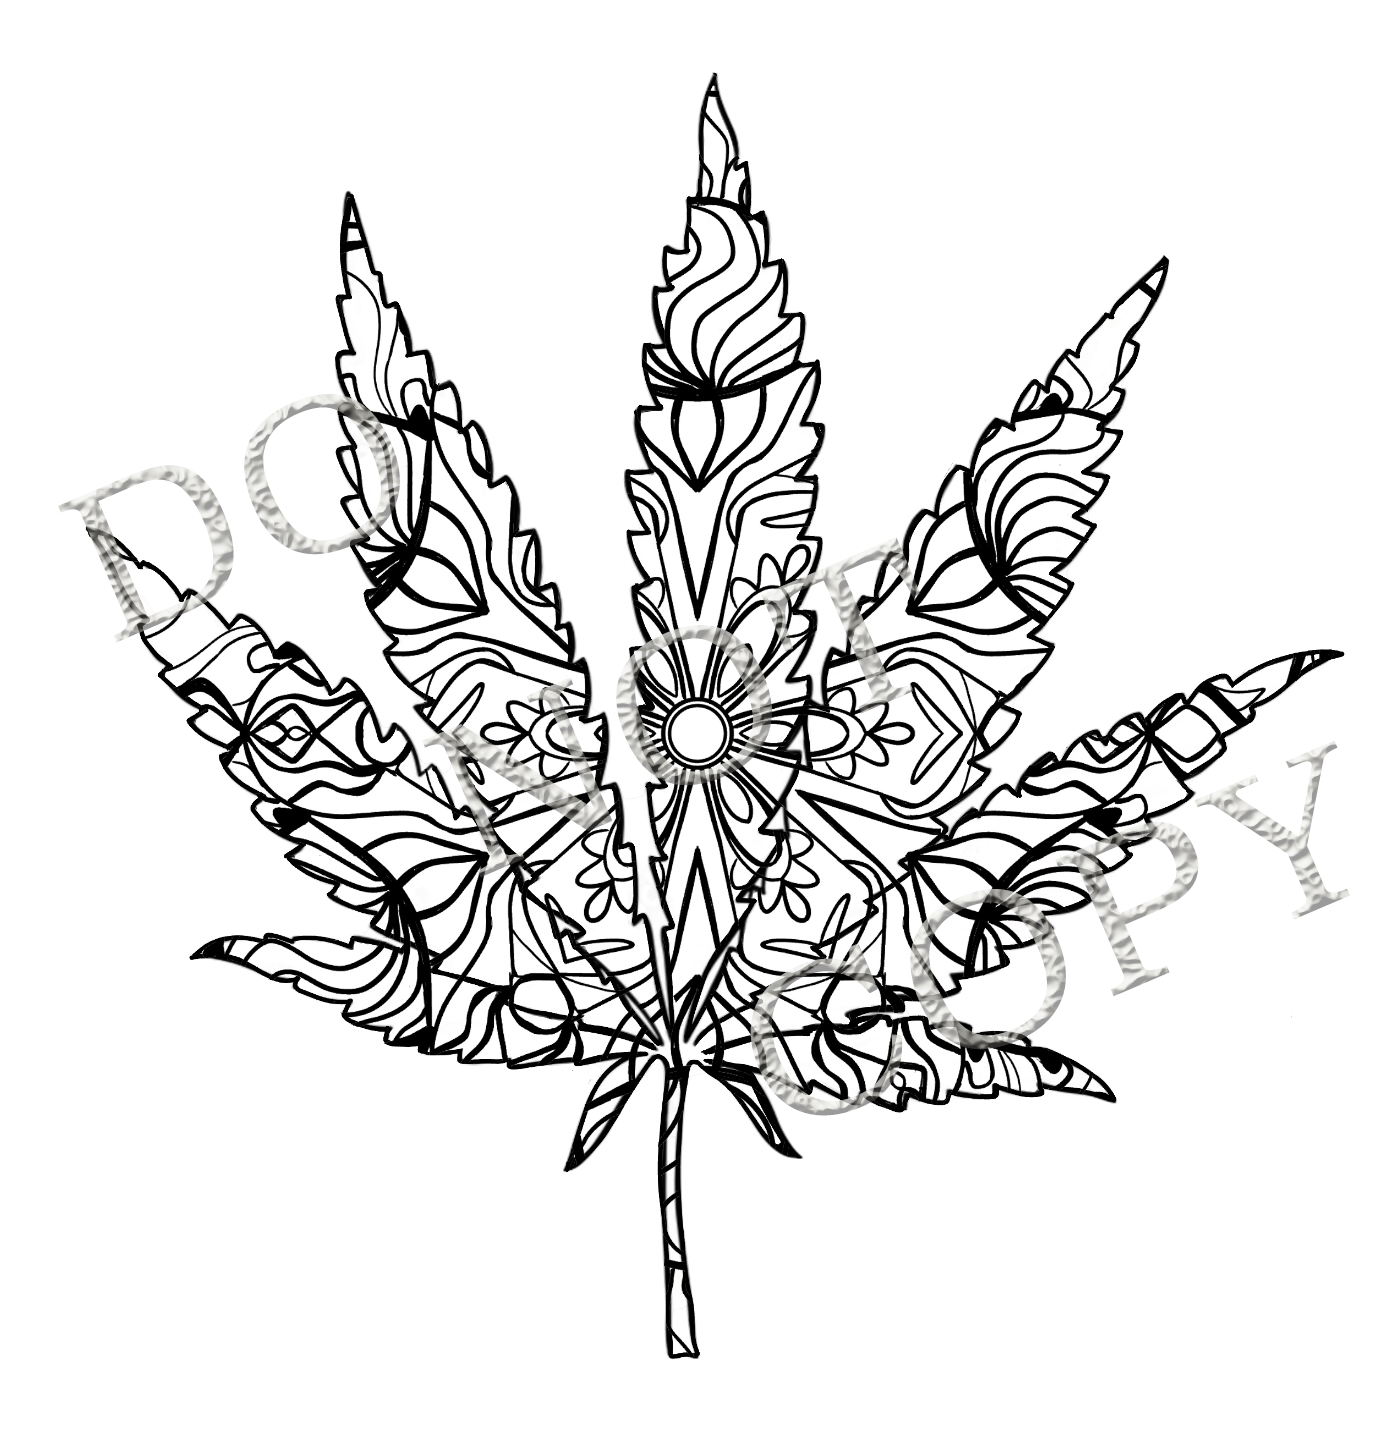 Fun games books coloring books hand drawn mandala marijuana leaf coloring page or printable framable art for your home